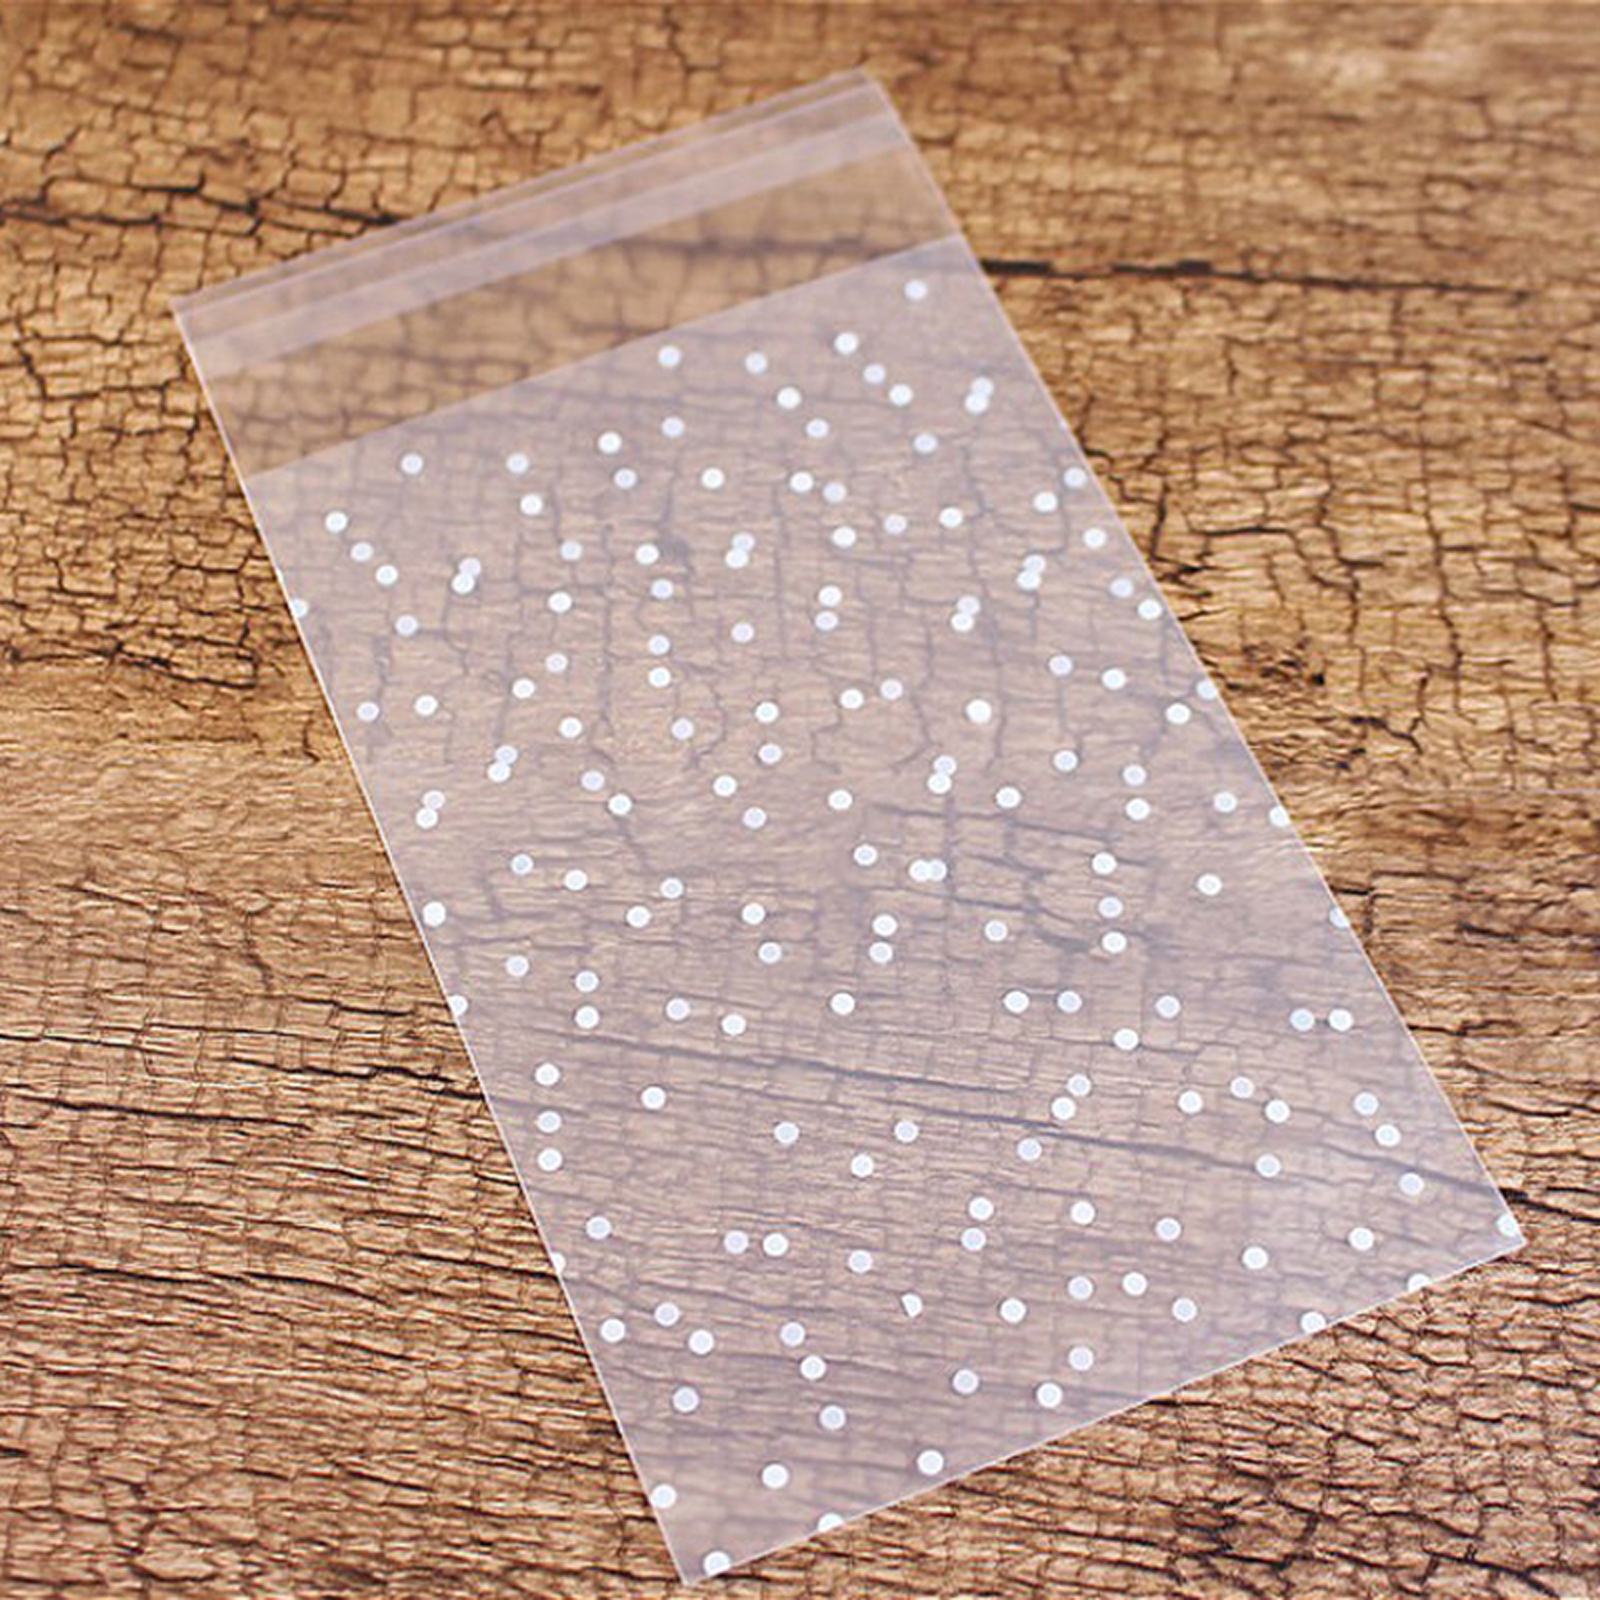 100Pcs Self Adhesive Dot Transparent Plastic Candy Cookie Gift Bag Wedding Party 